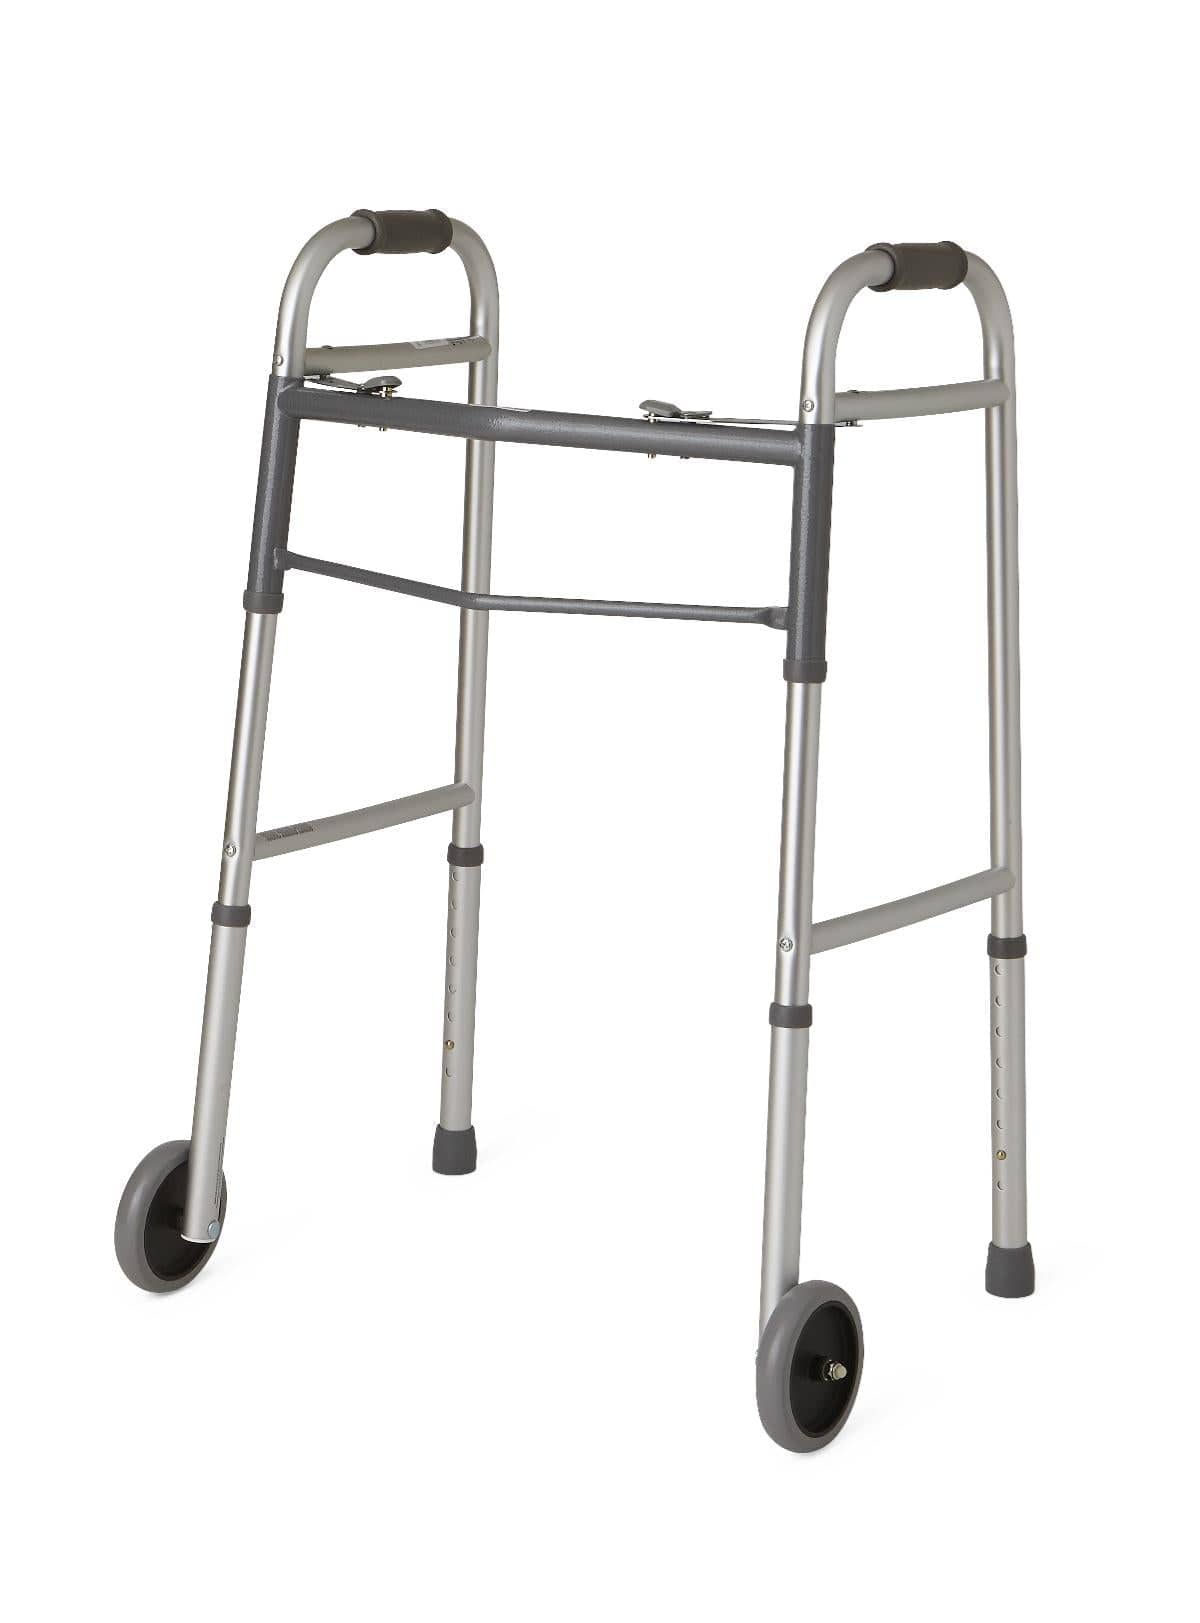 Medline Case of 4 Medline Guardian Two-Button Folding Walkers with 5" Wheels